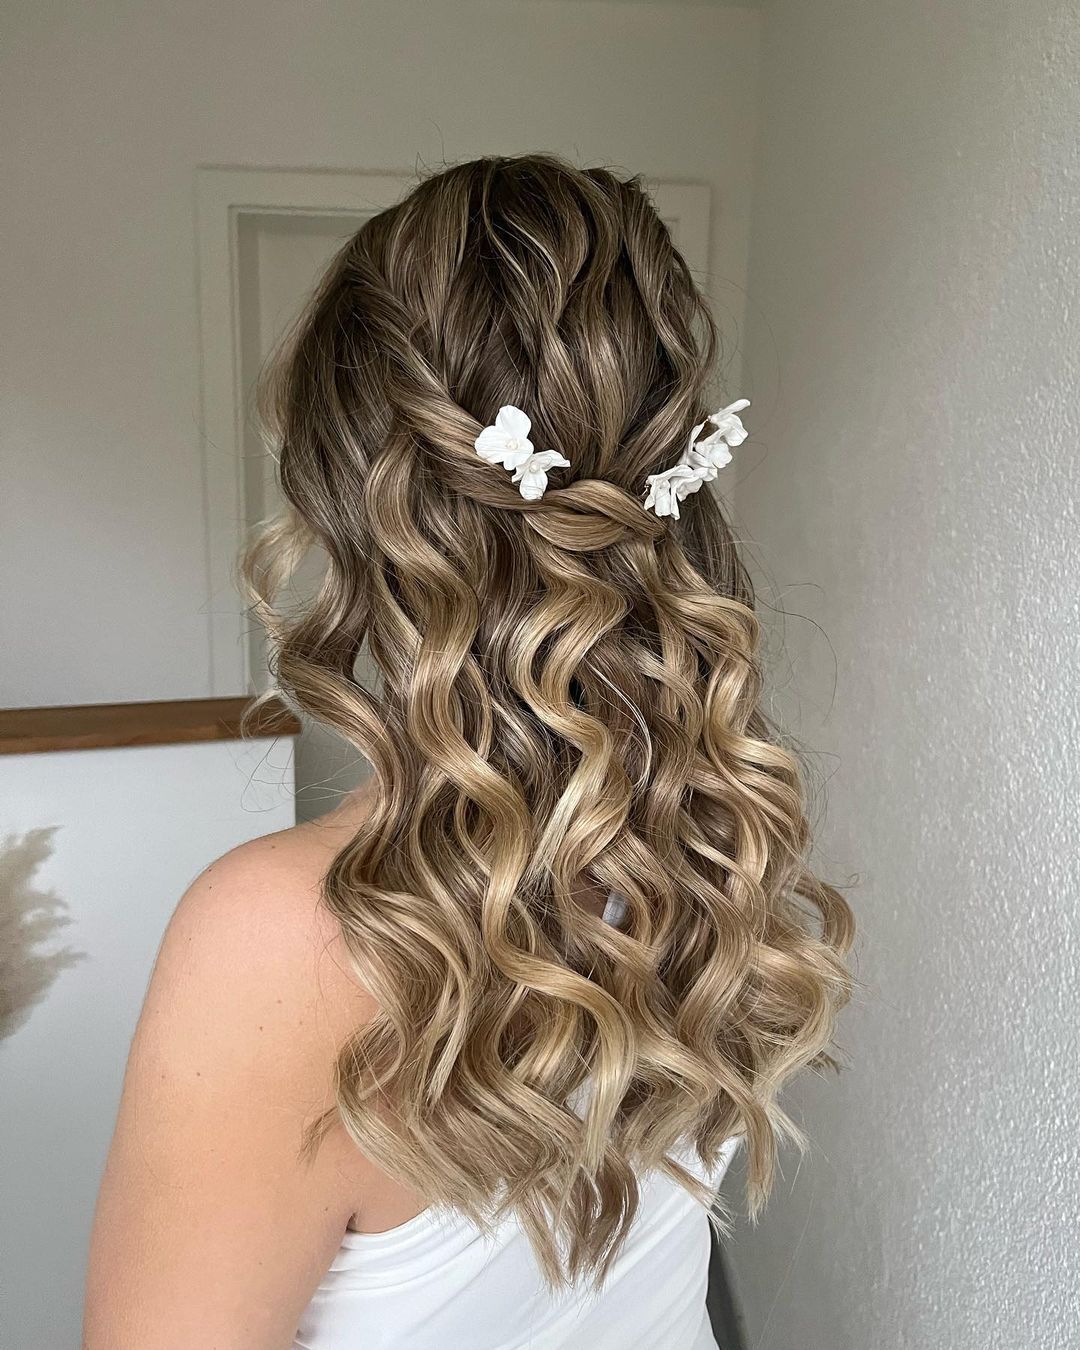 curled hair with flower piece